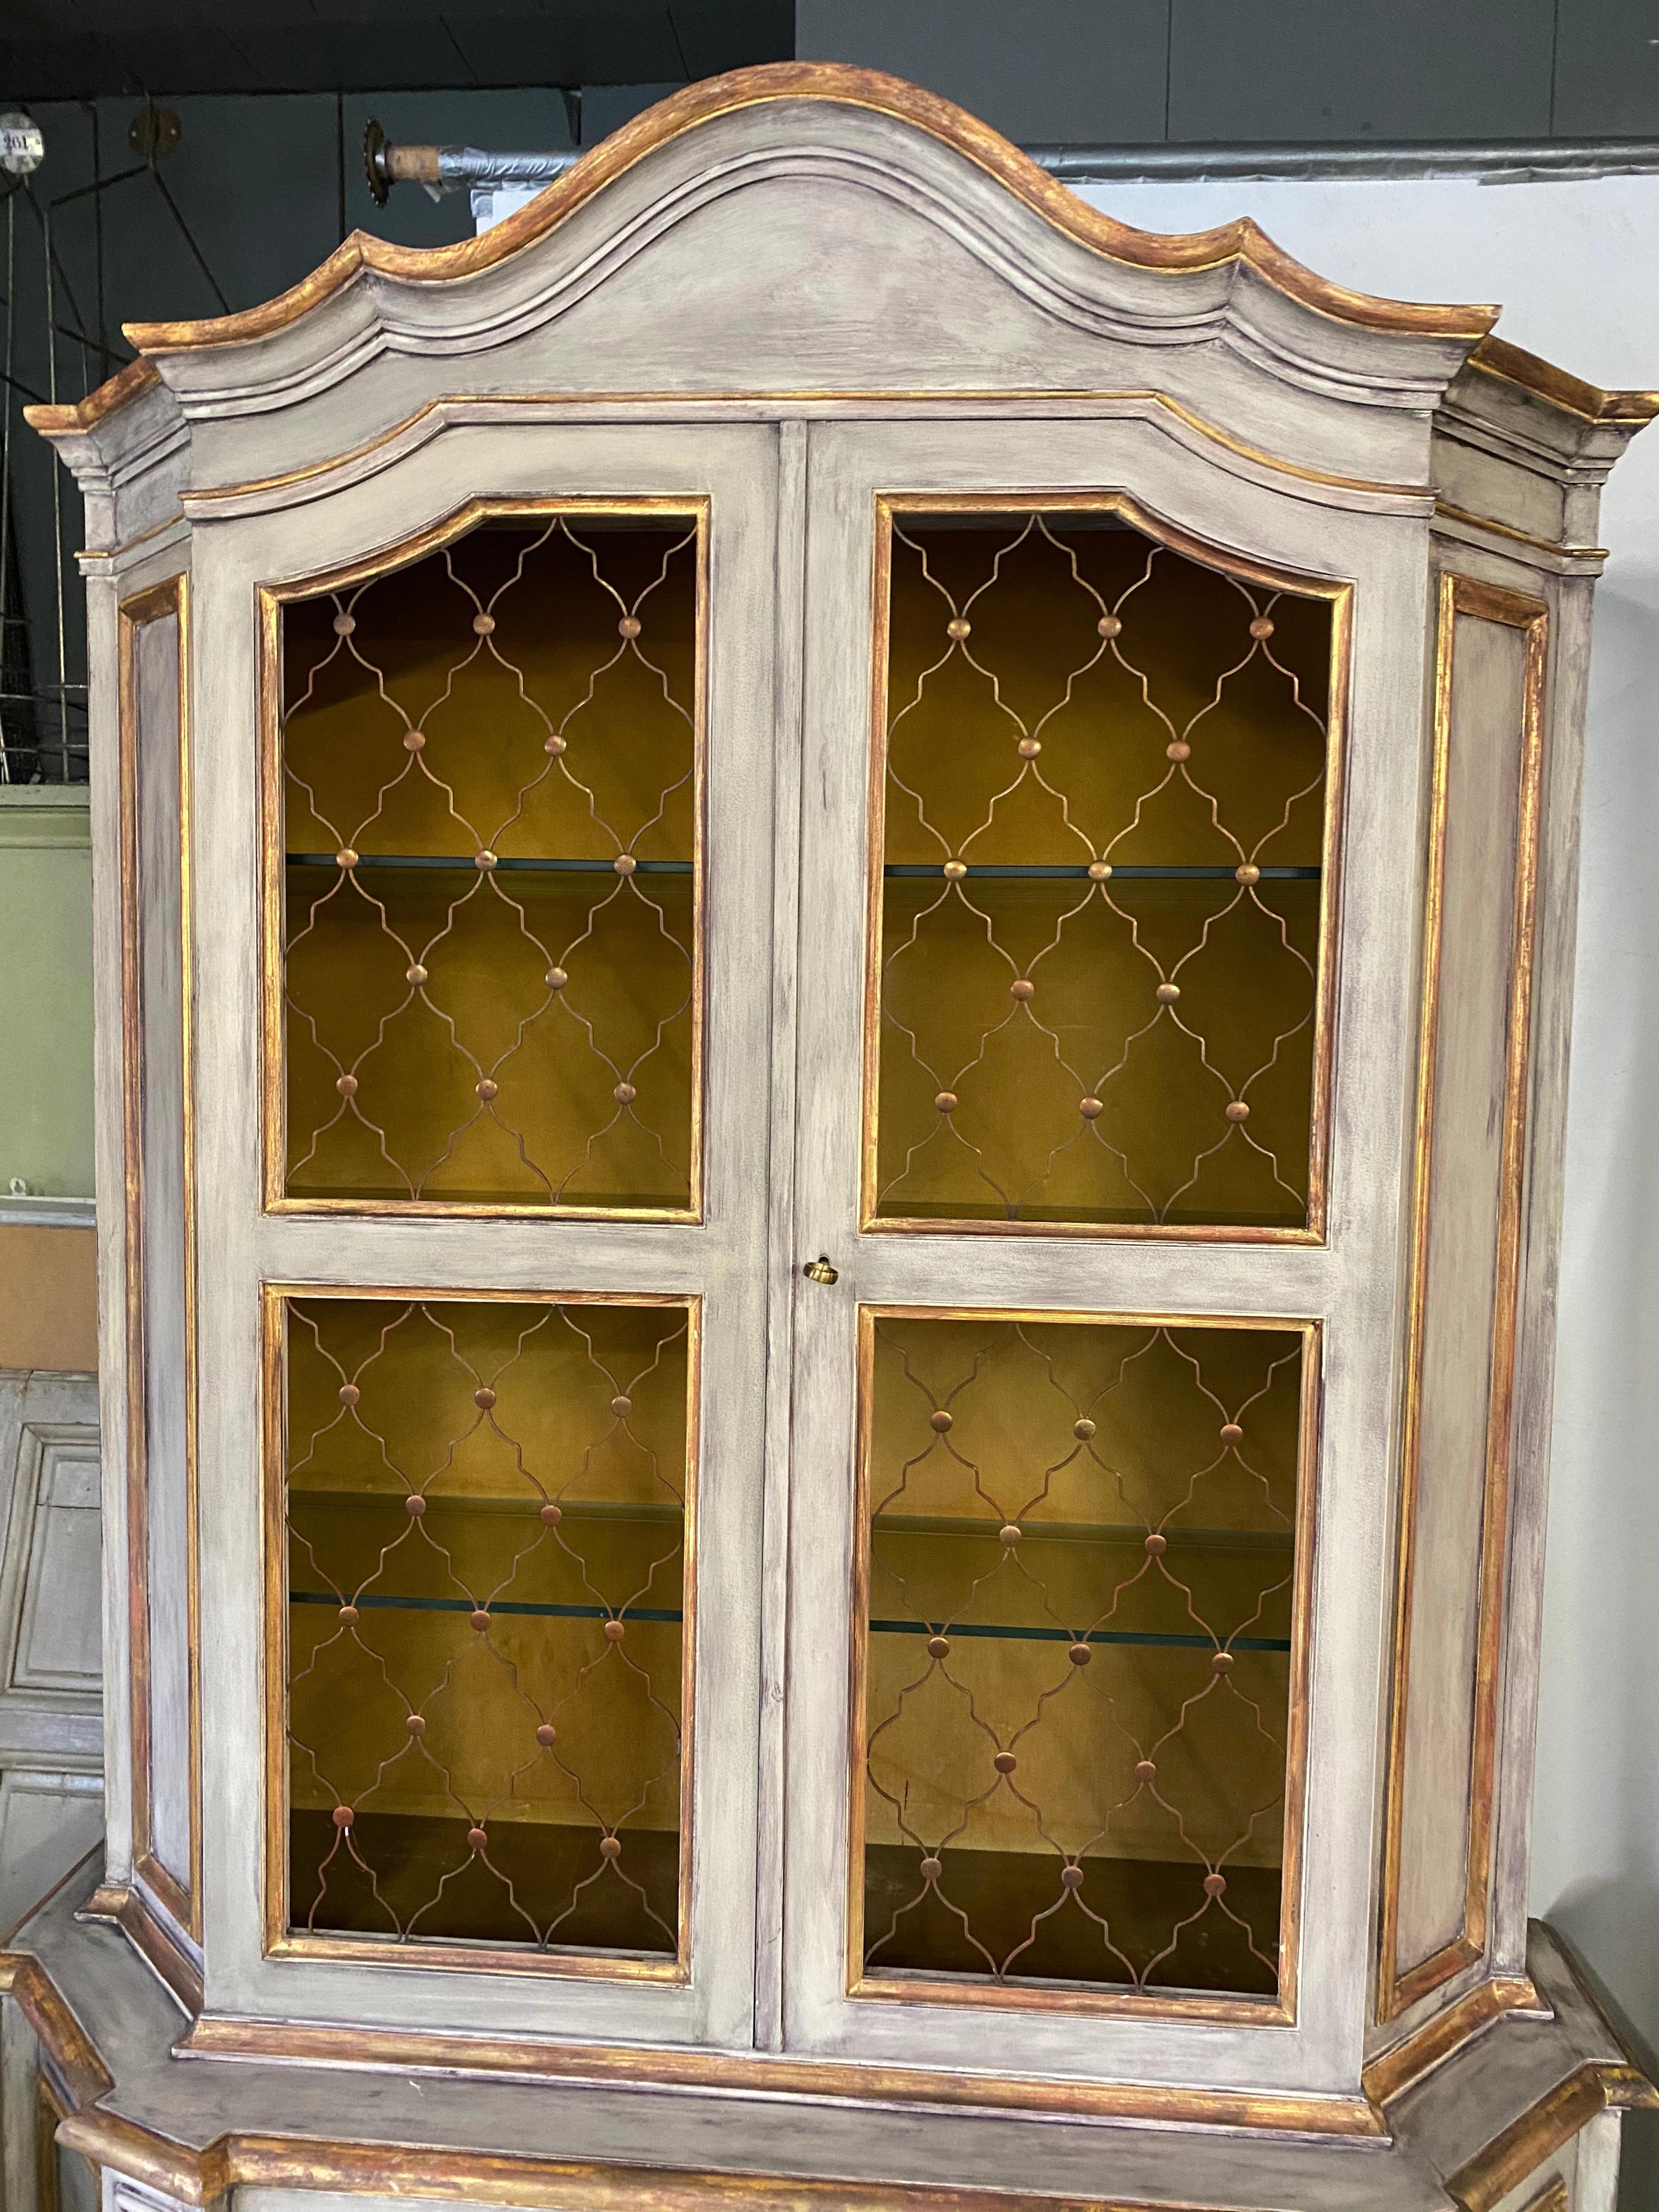 Venetian style cabinets have four (three glass) open shelves behind a pair of doors paneled with copper-colored screens above and two shelves below behind solid paneled doors. The pediment is in the Baroque Venetian style. Interiors above are lined